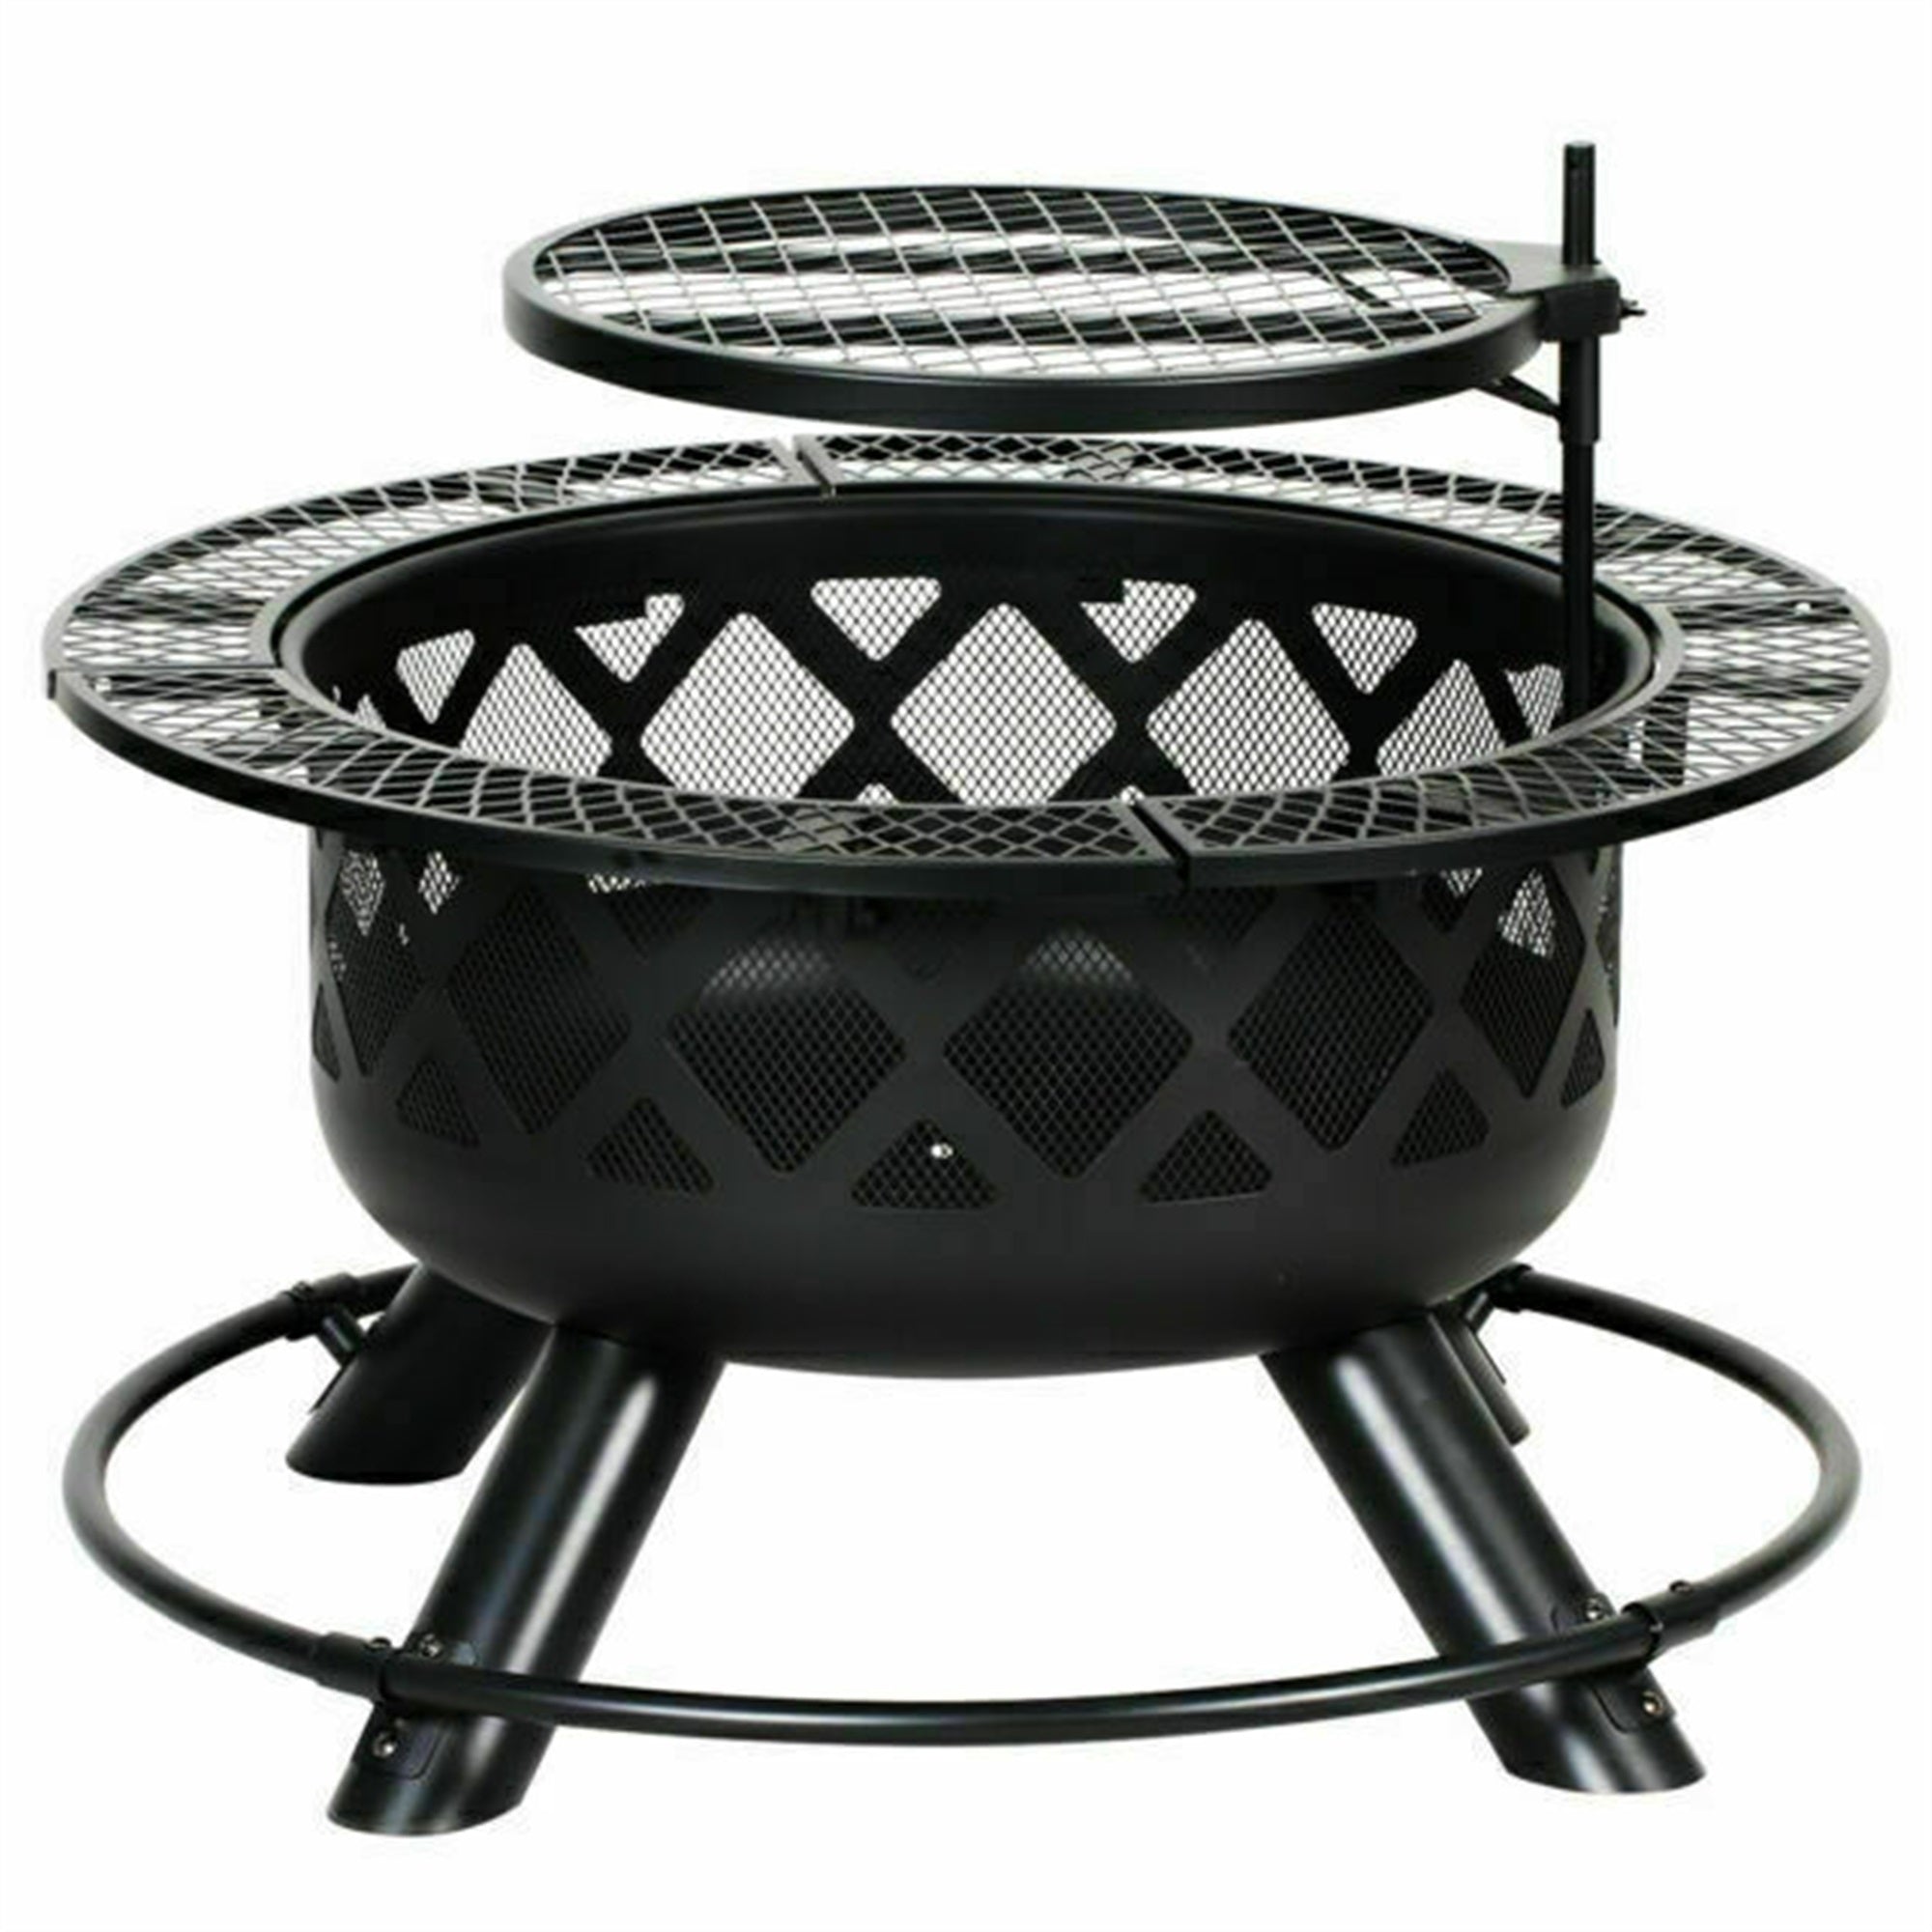 Shinerich Industrial Outdoor Circular Ranch Fire and Grilling Metal Pit, Black, 24